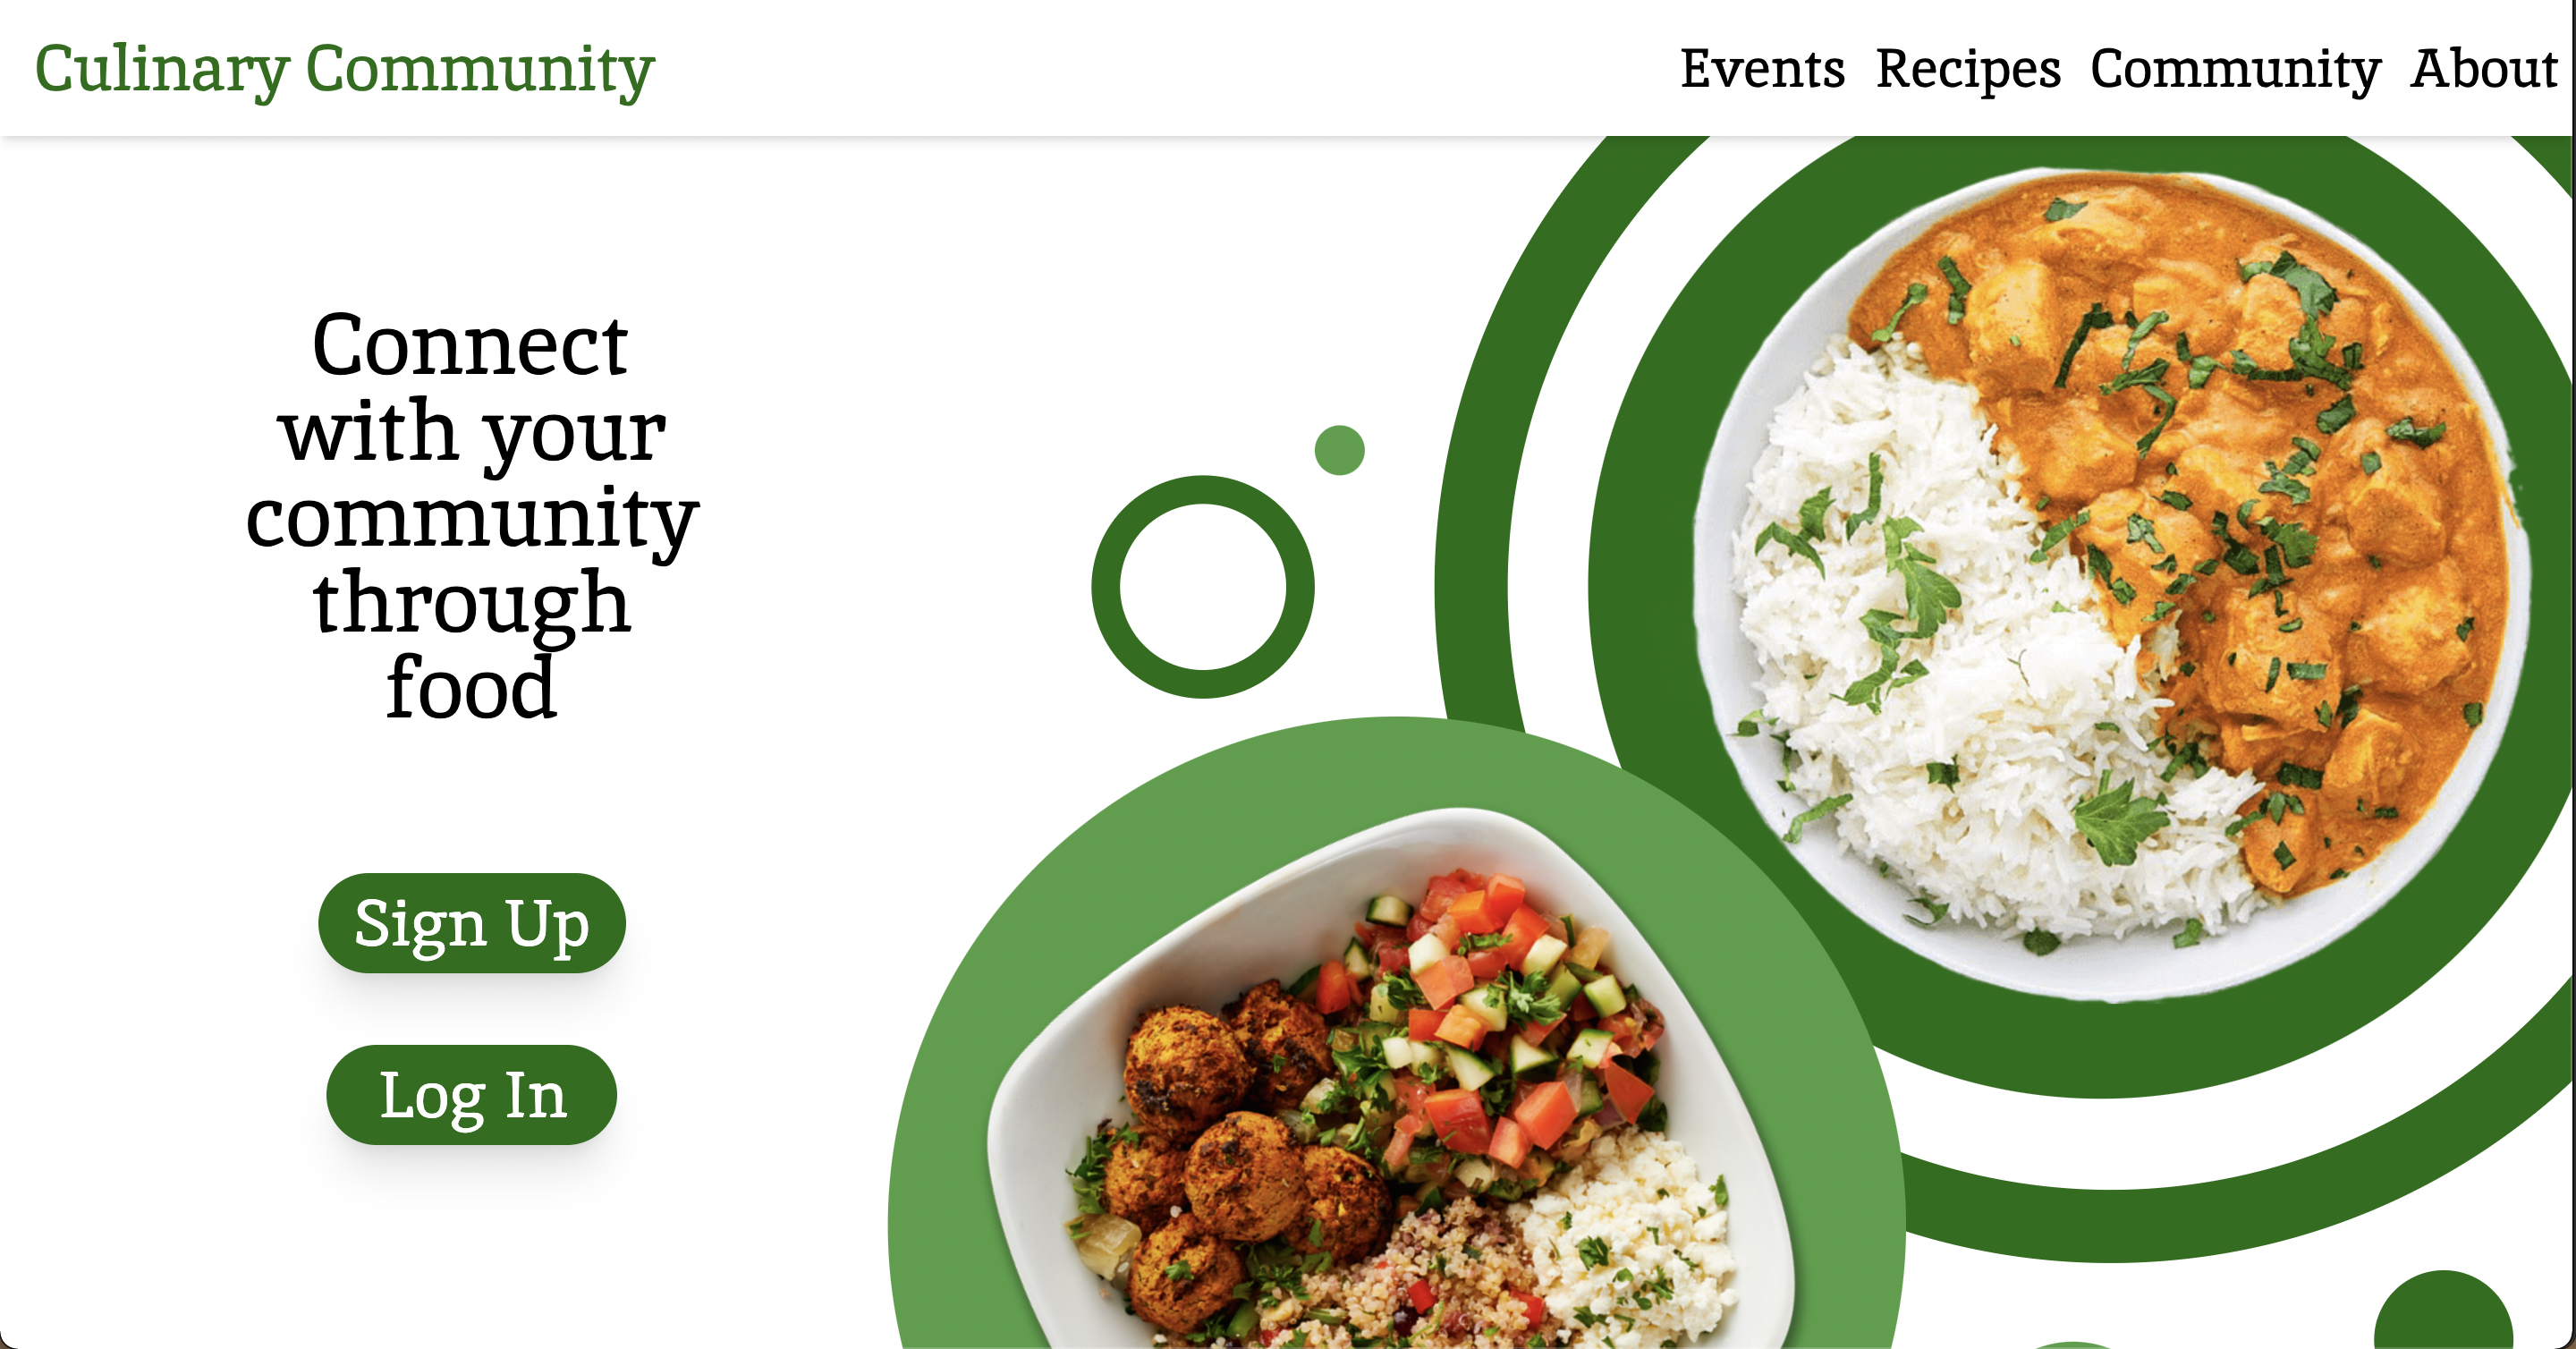 The home page of Culinary Community